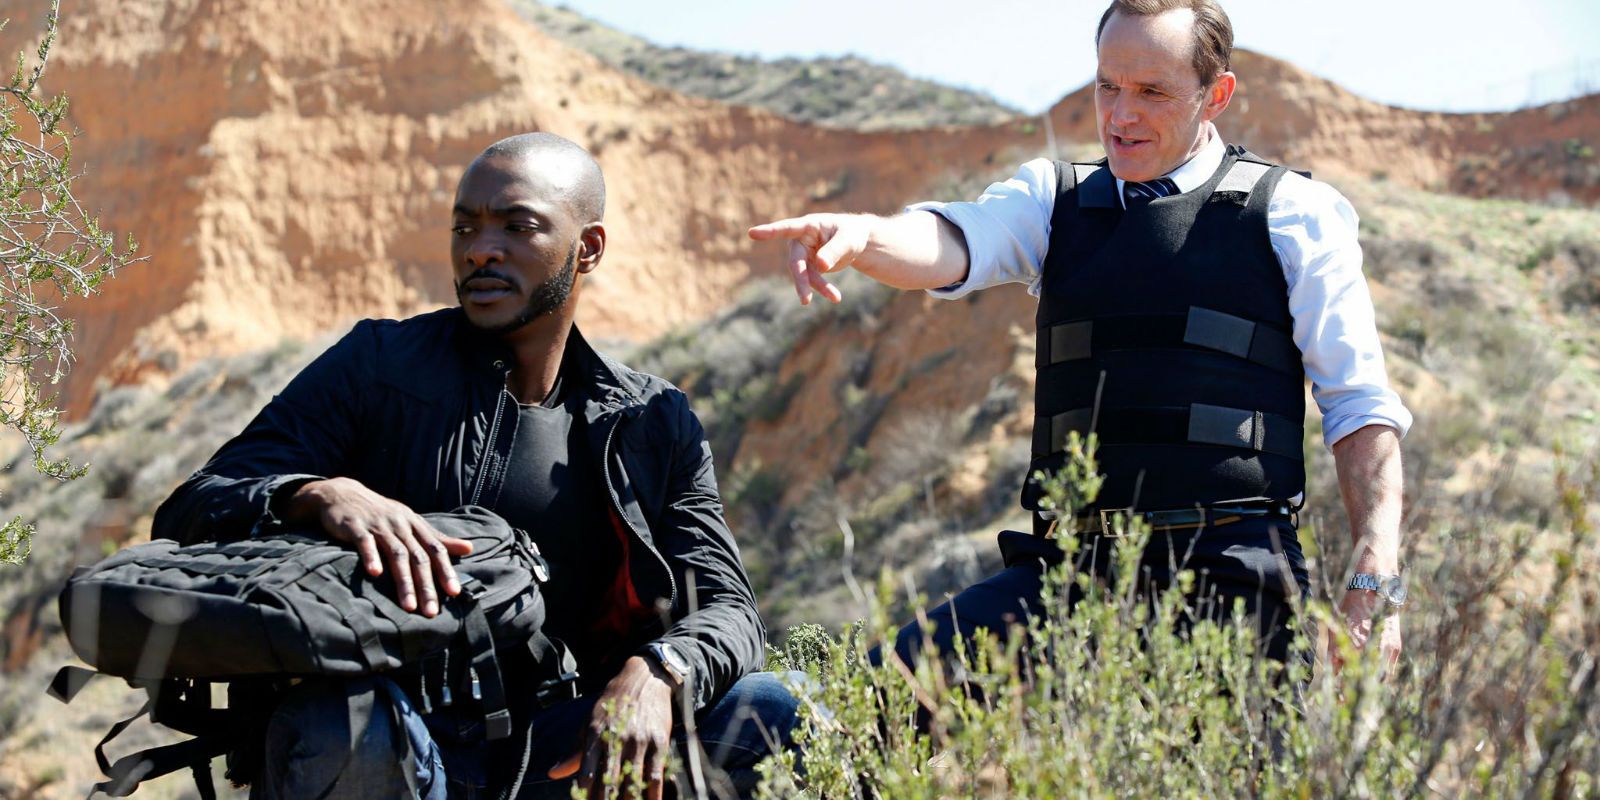 BJ Britt and Clark Gregg in Agents of SHIELD